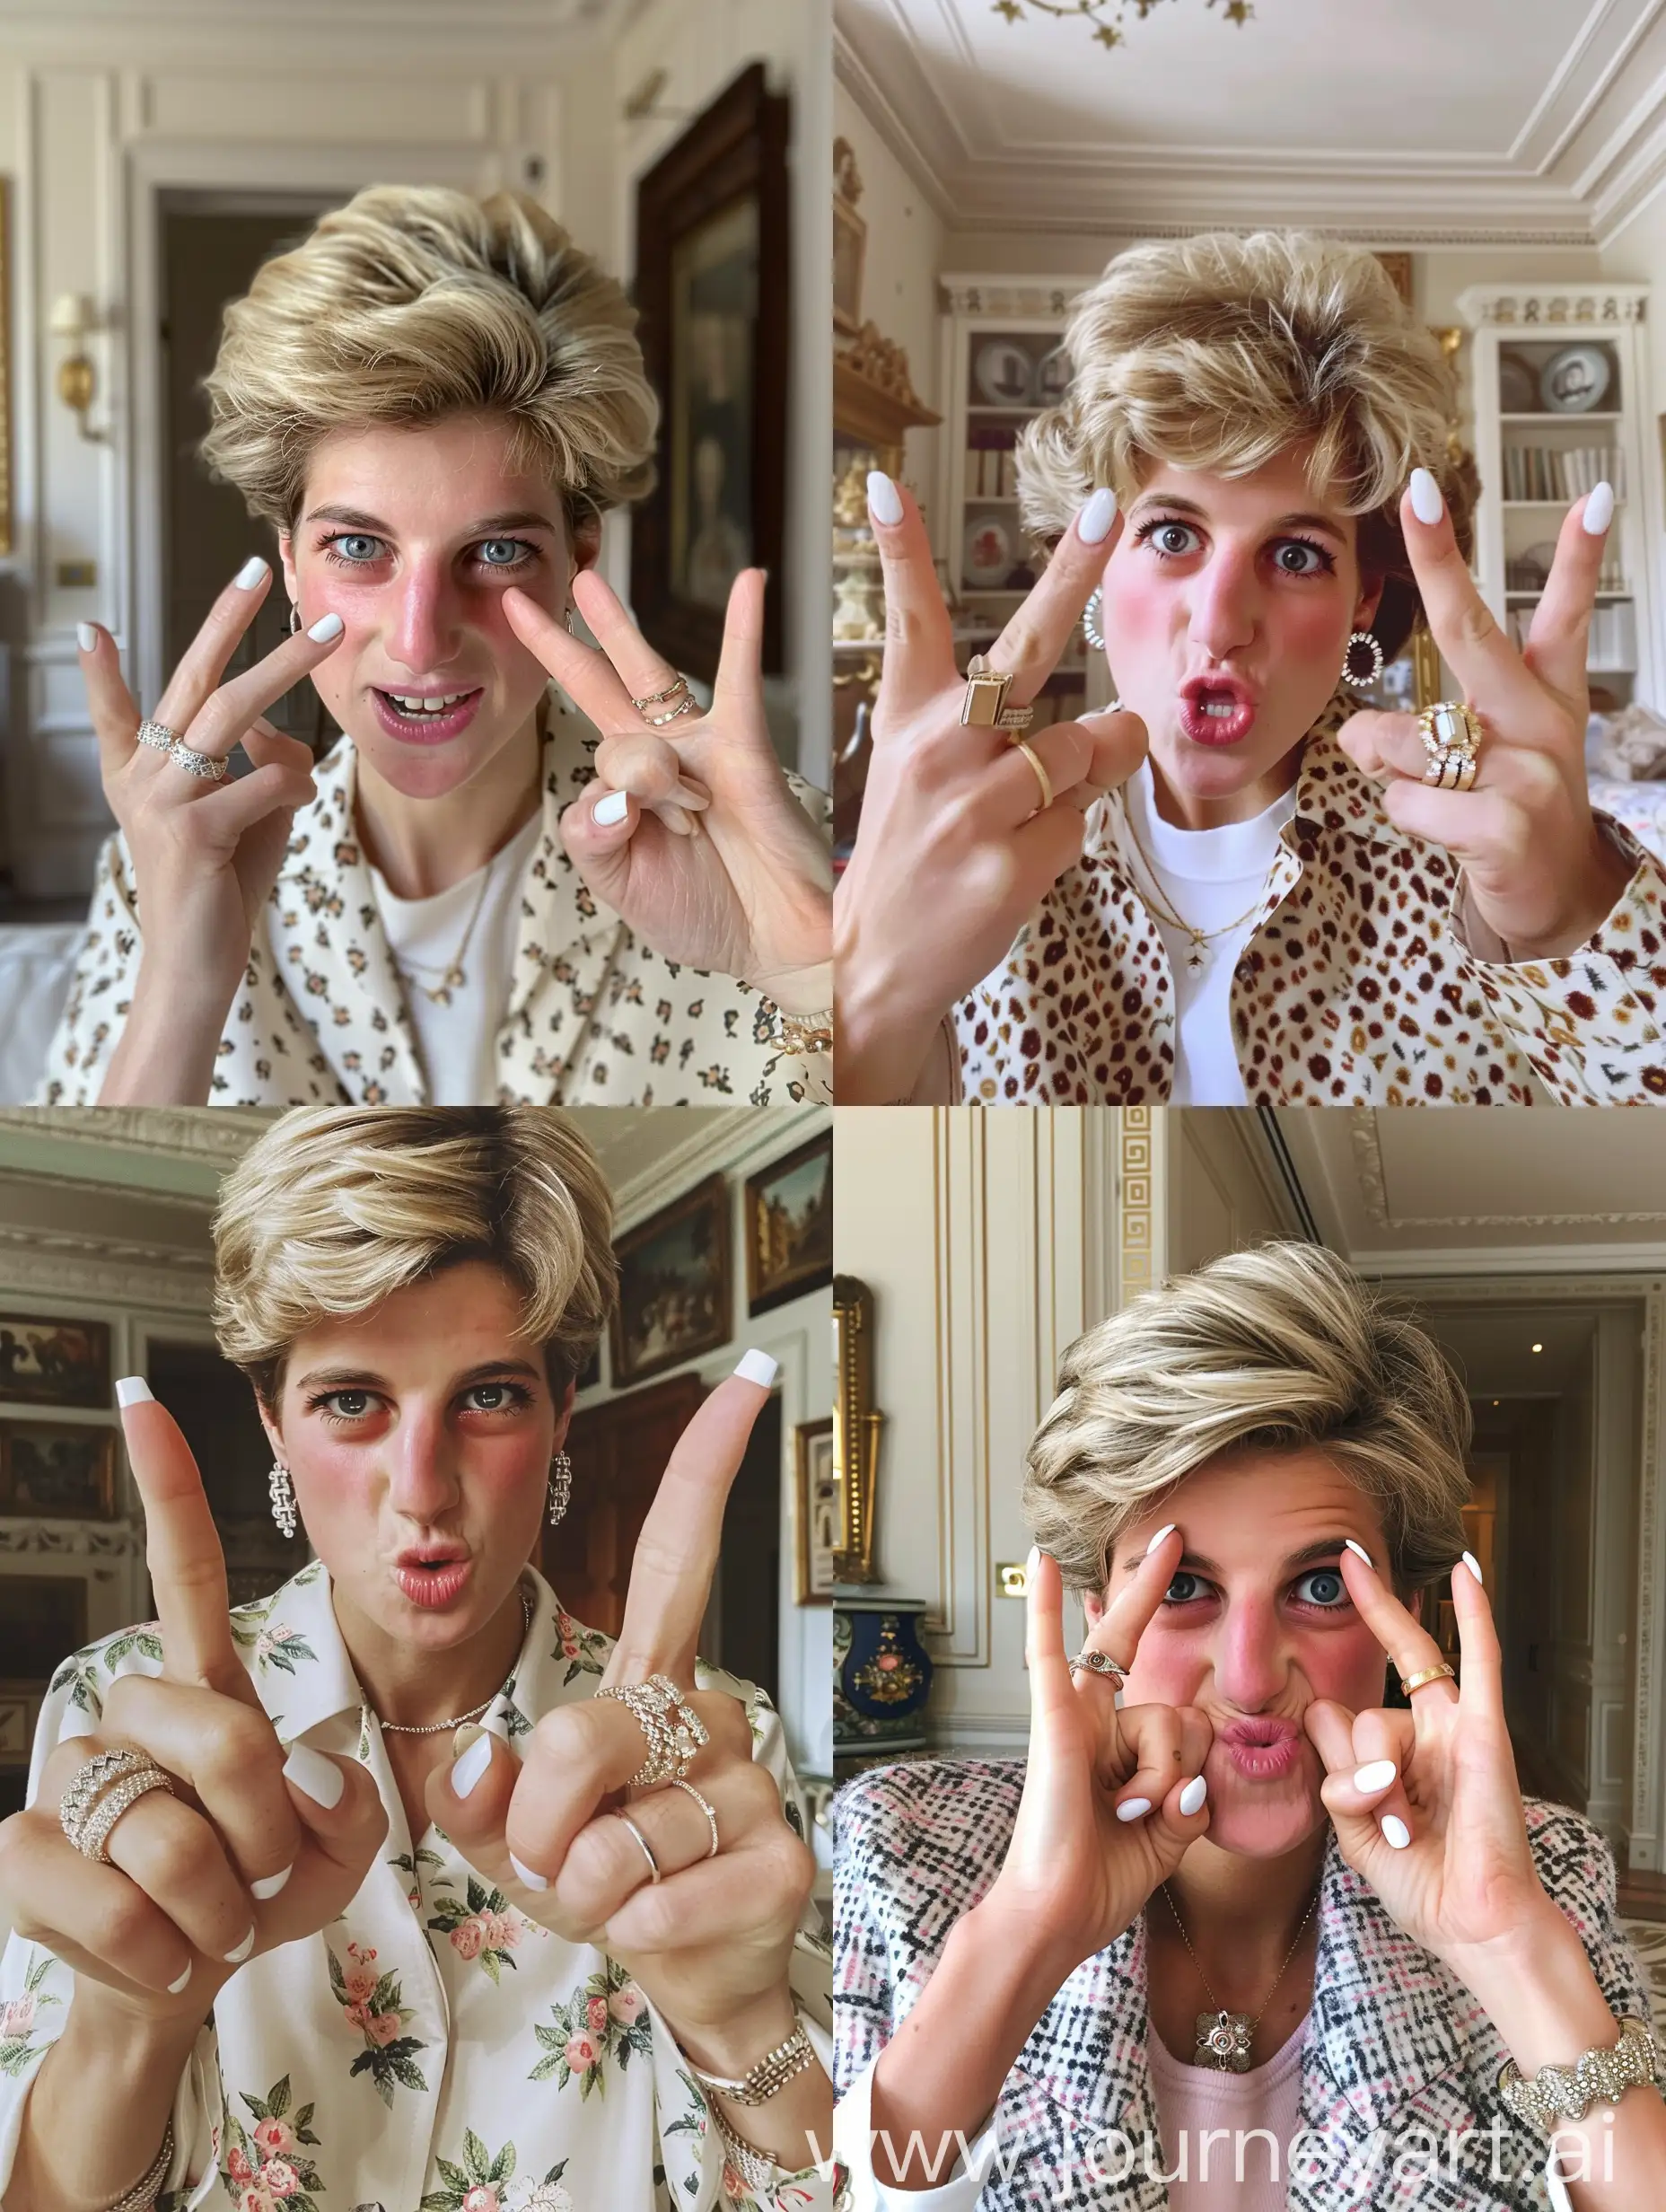 Aesthetic Instagram close up selfie: Princess Diana in fancy London flat, selfie, both hands up, rings, casual clothes, white gel nail polish, manicured, making a silly face 